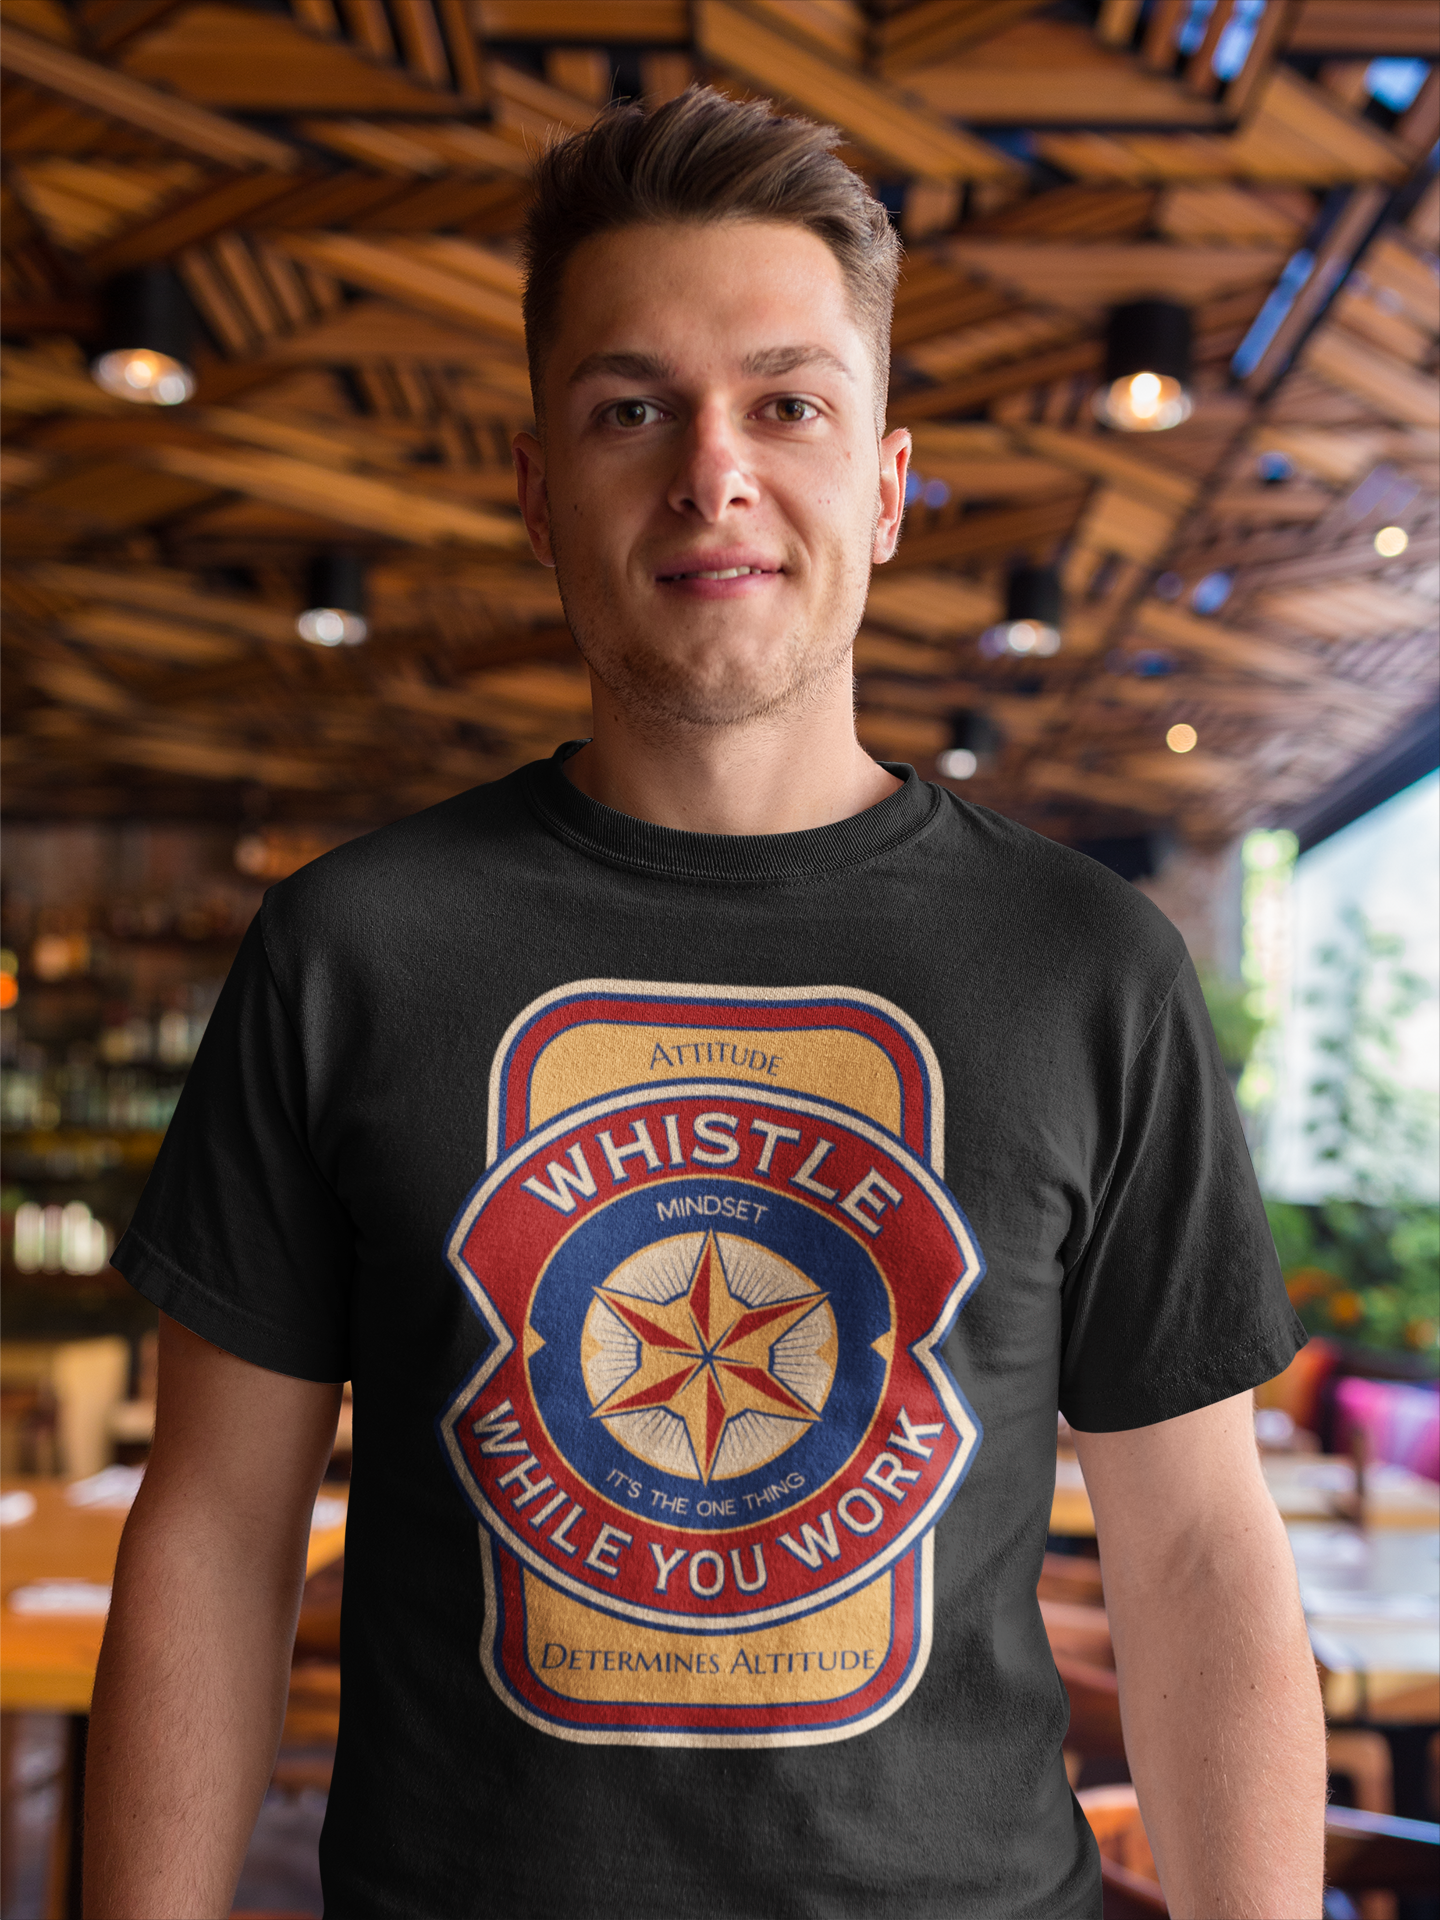 Whistle While You Work - Mindset - It's The One Thing - Attitude Determines Altitude ~ Super-comfortable, Unisex Short Sleeve T shirt With Add-A-Tude